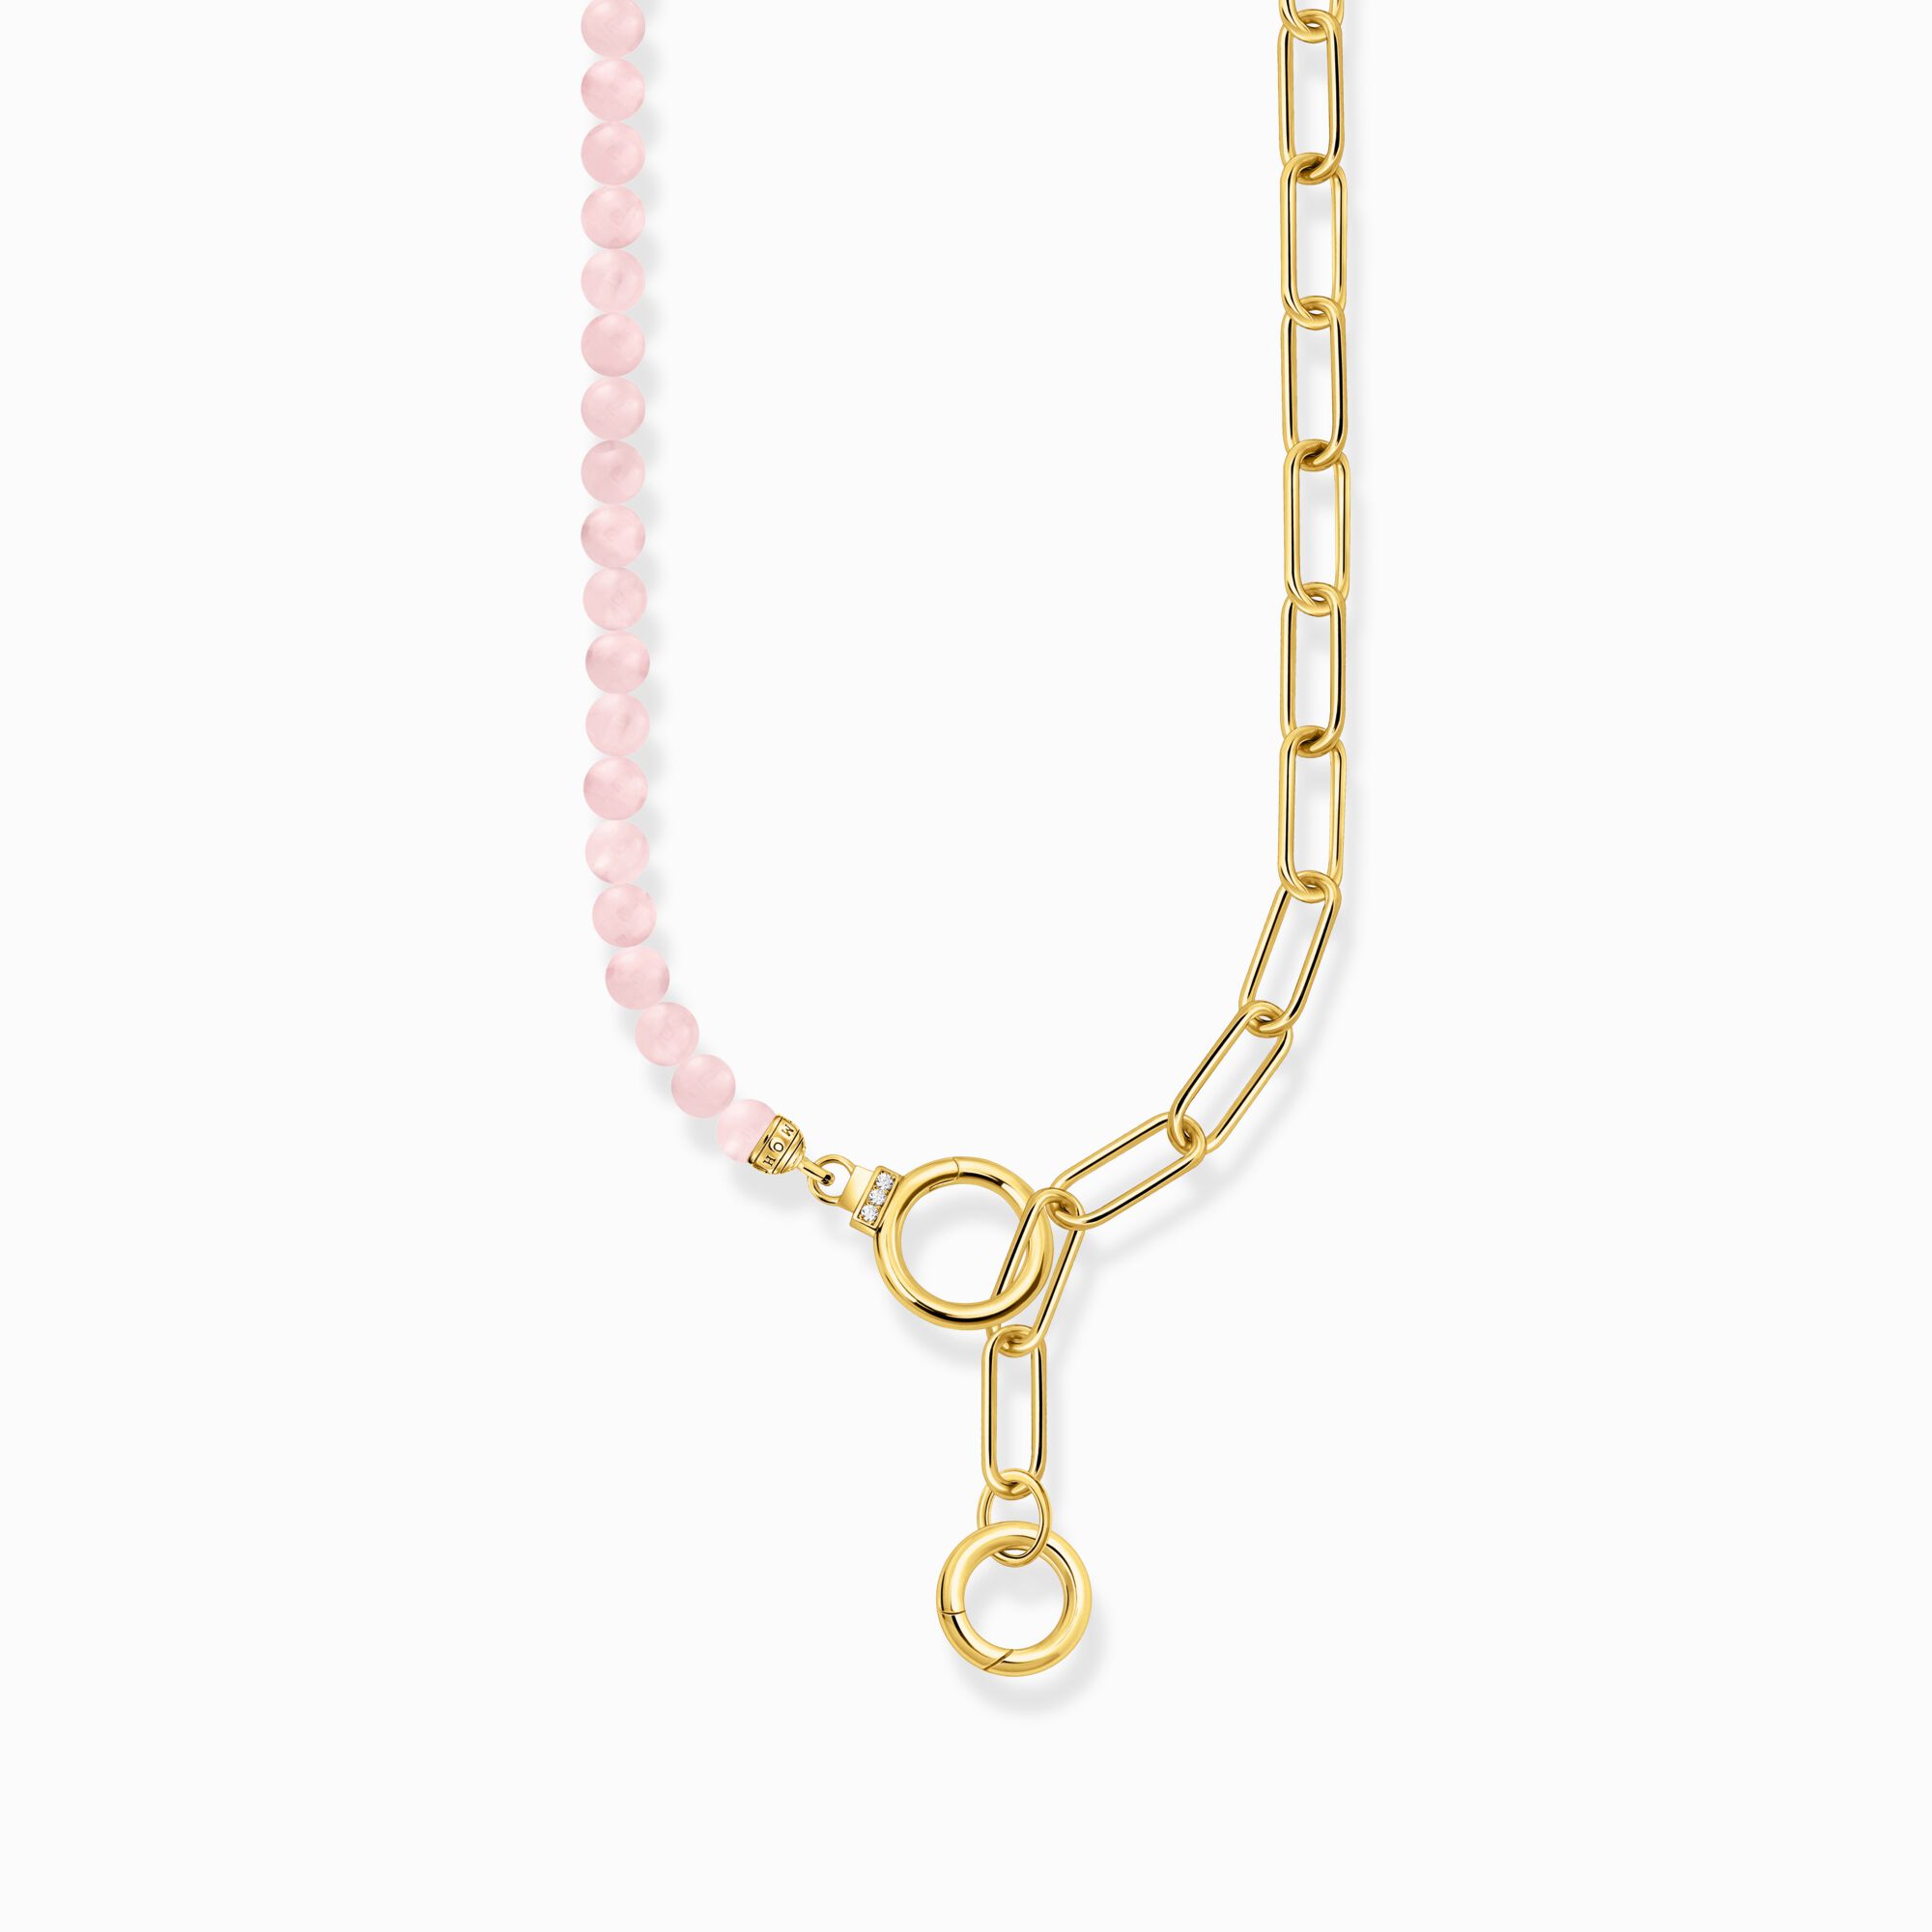 Gold-plated link chain necklace with rose quartz beads from the  collection in the THOMAS SABO online store